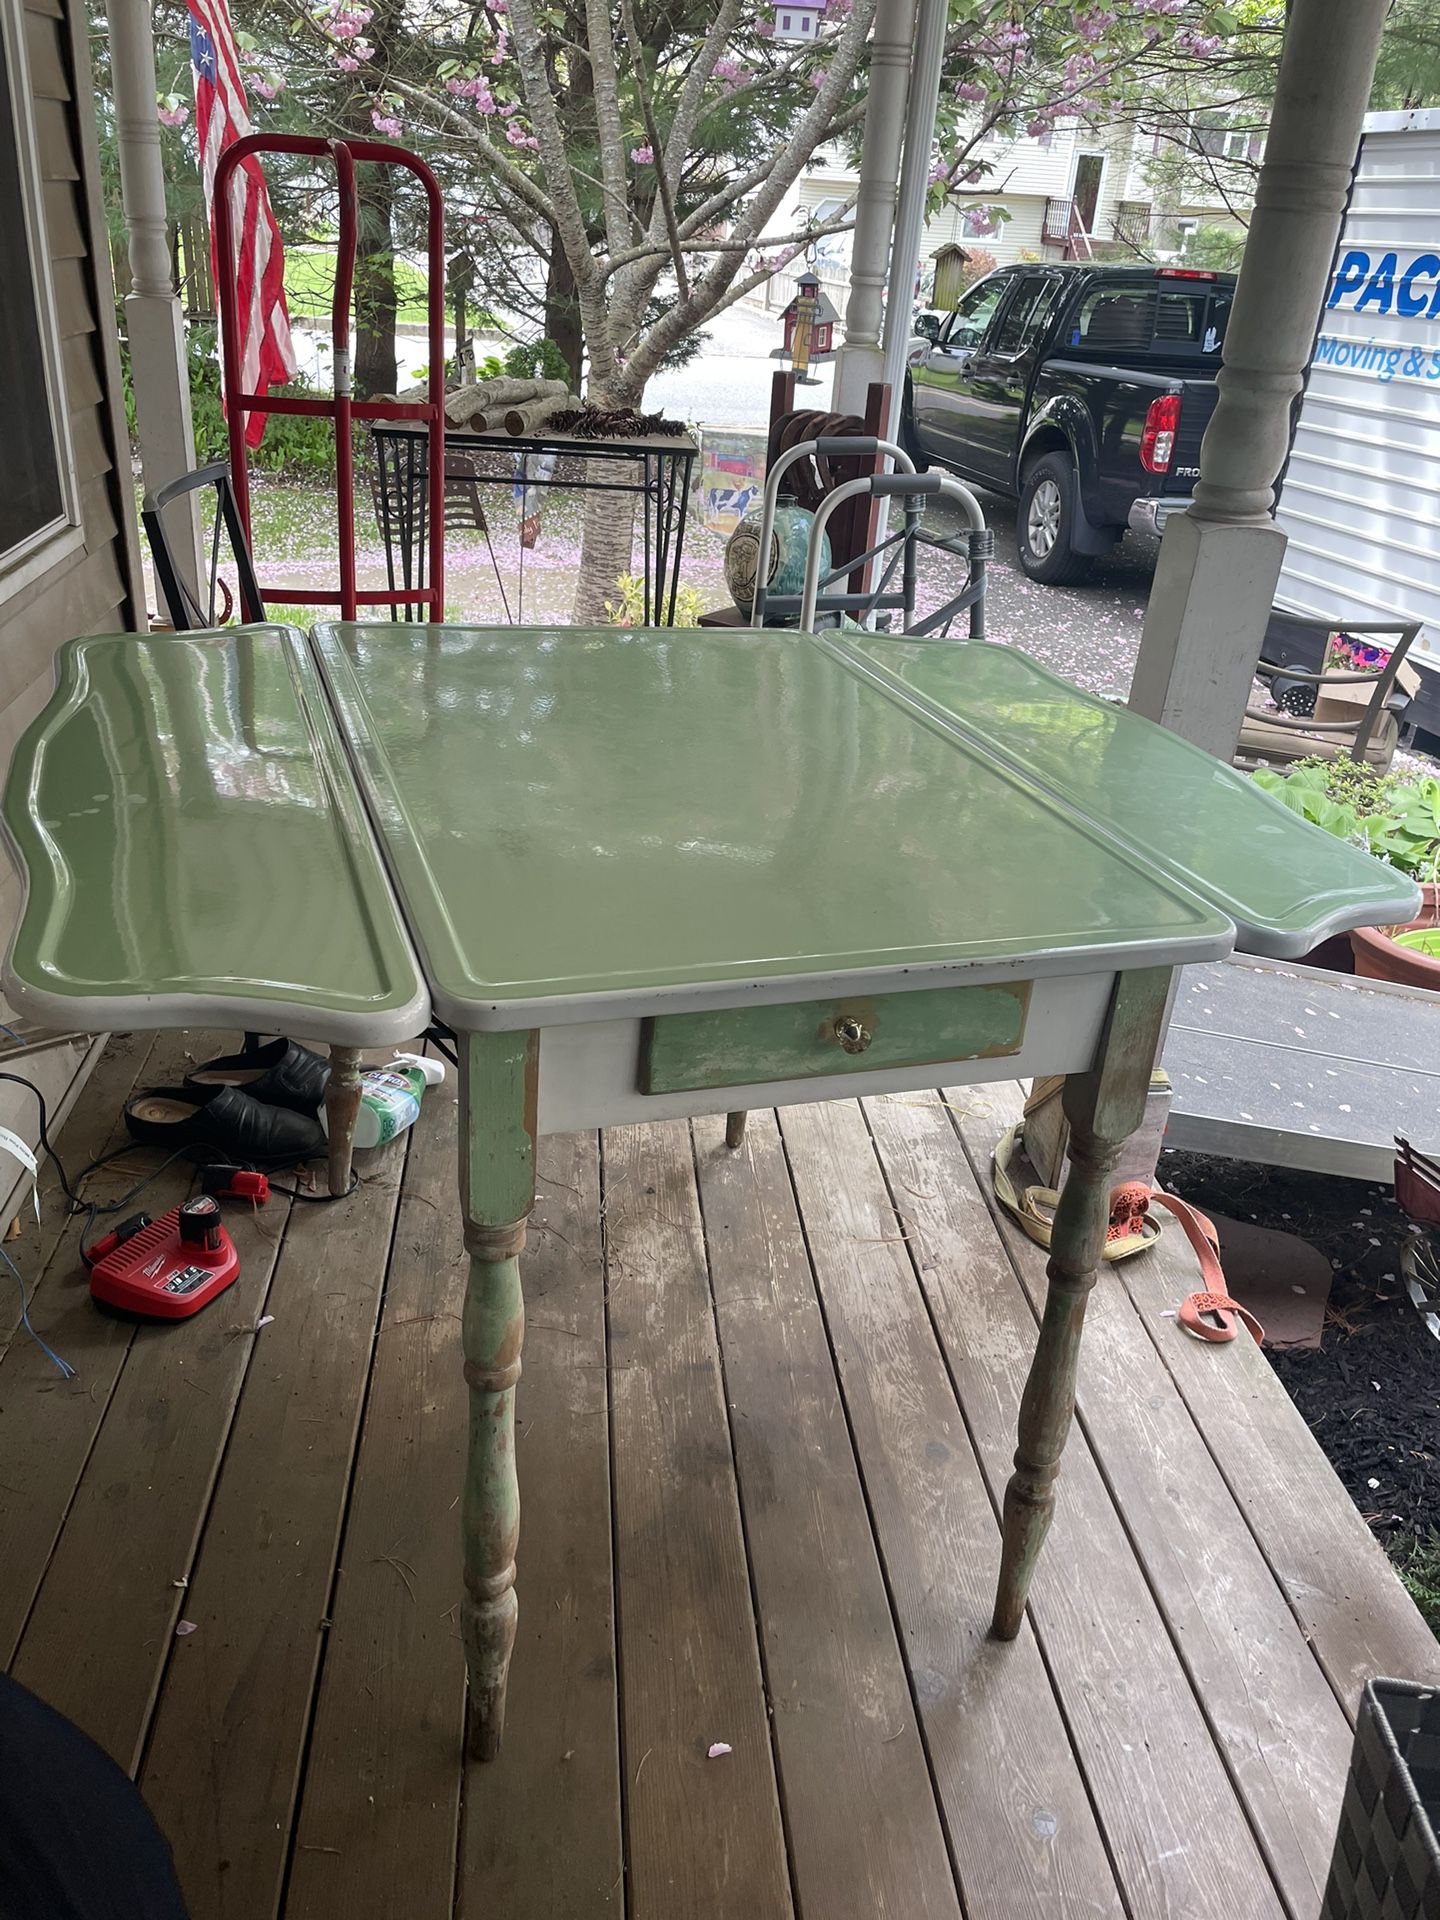 Vintage Country  Farm Table with drawer